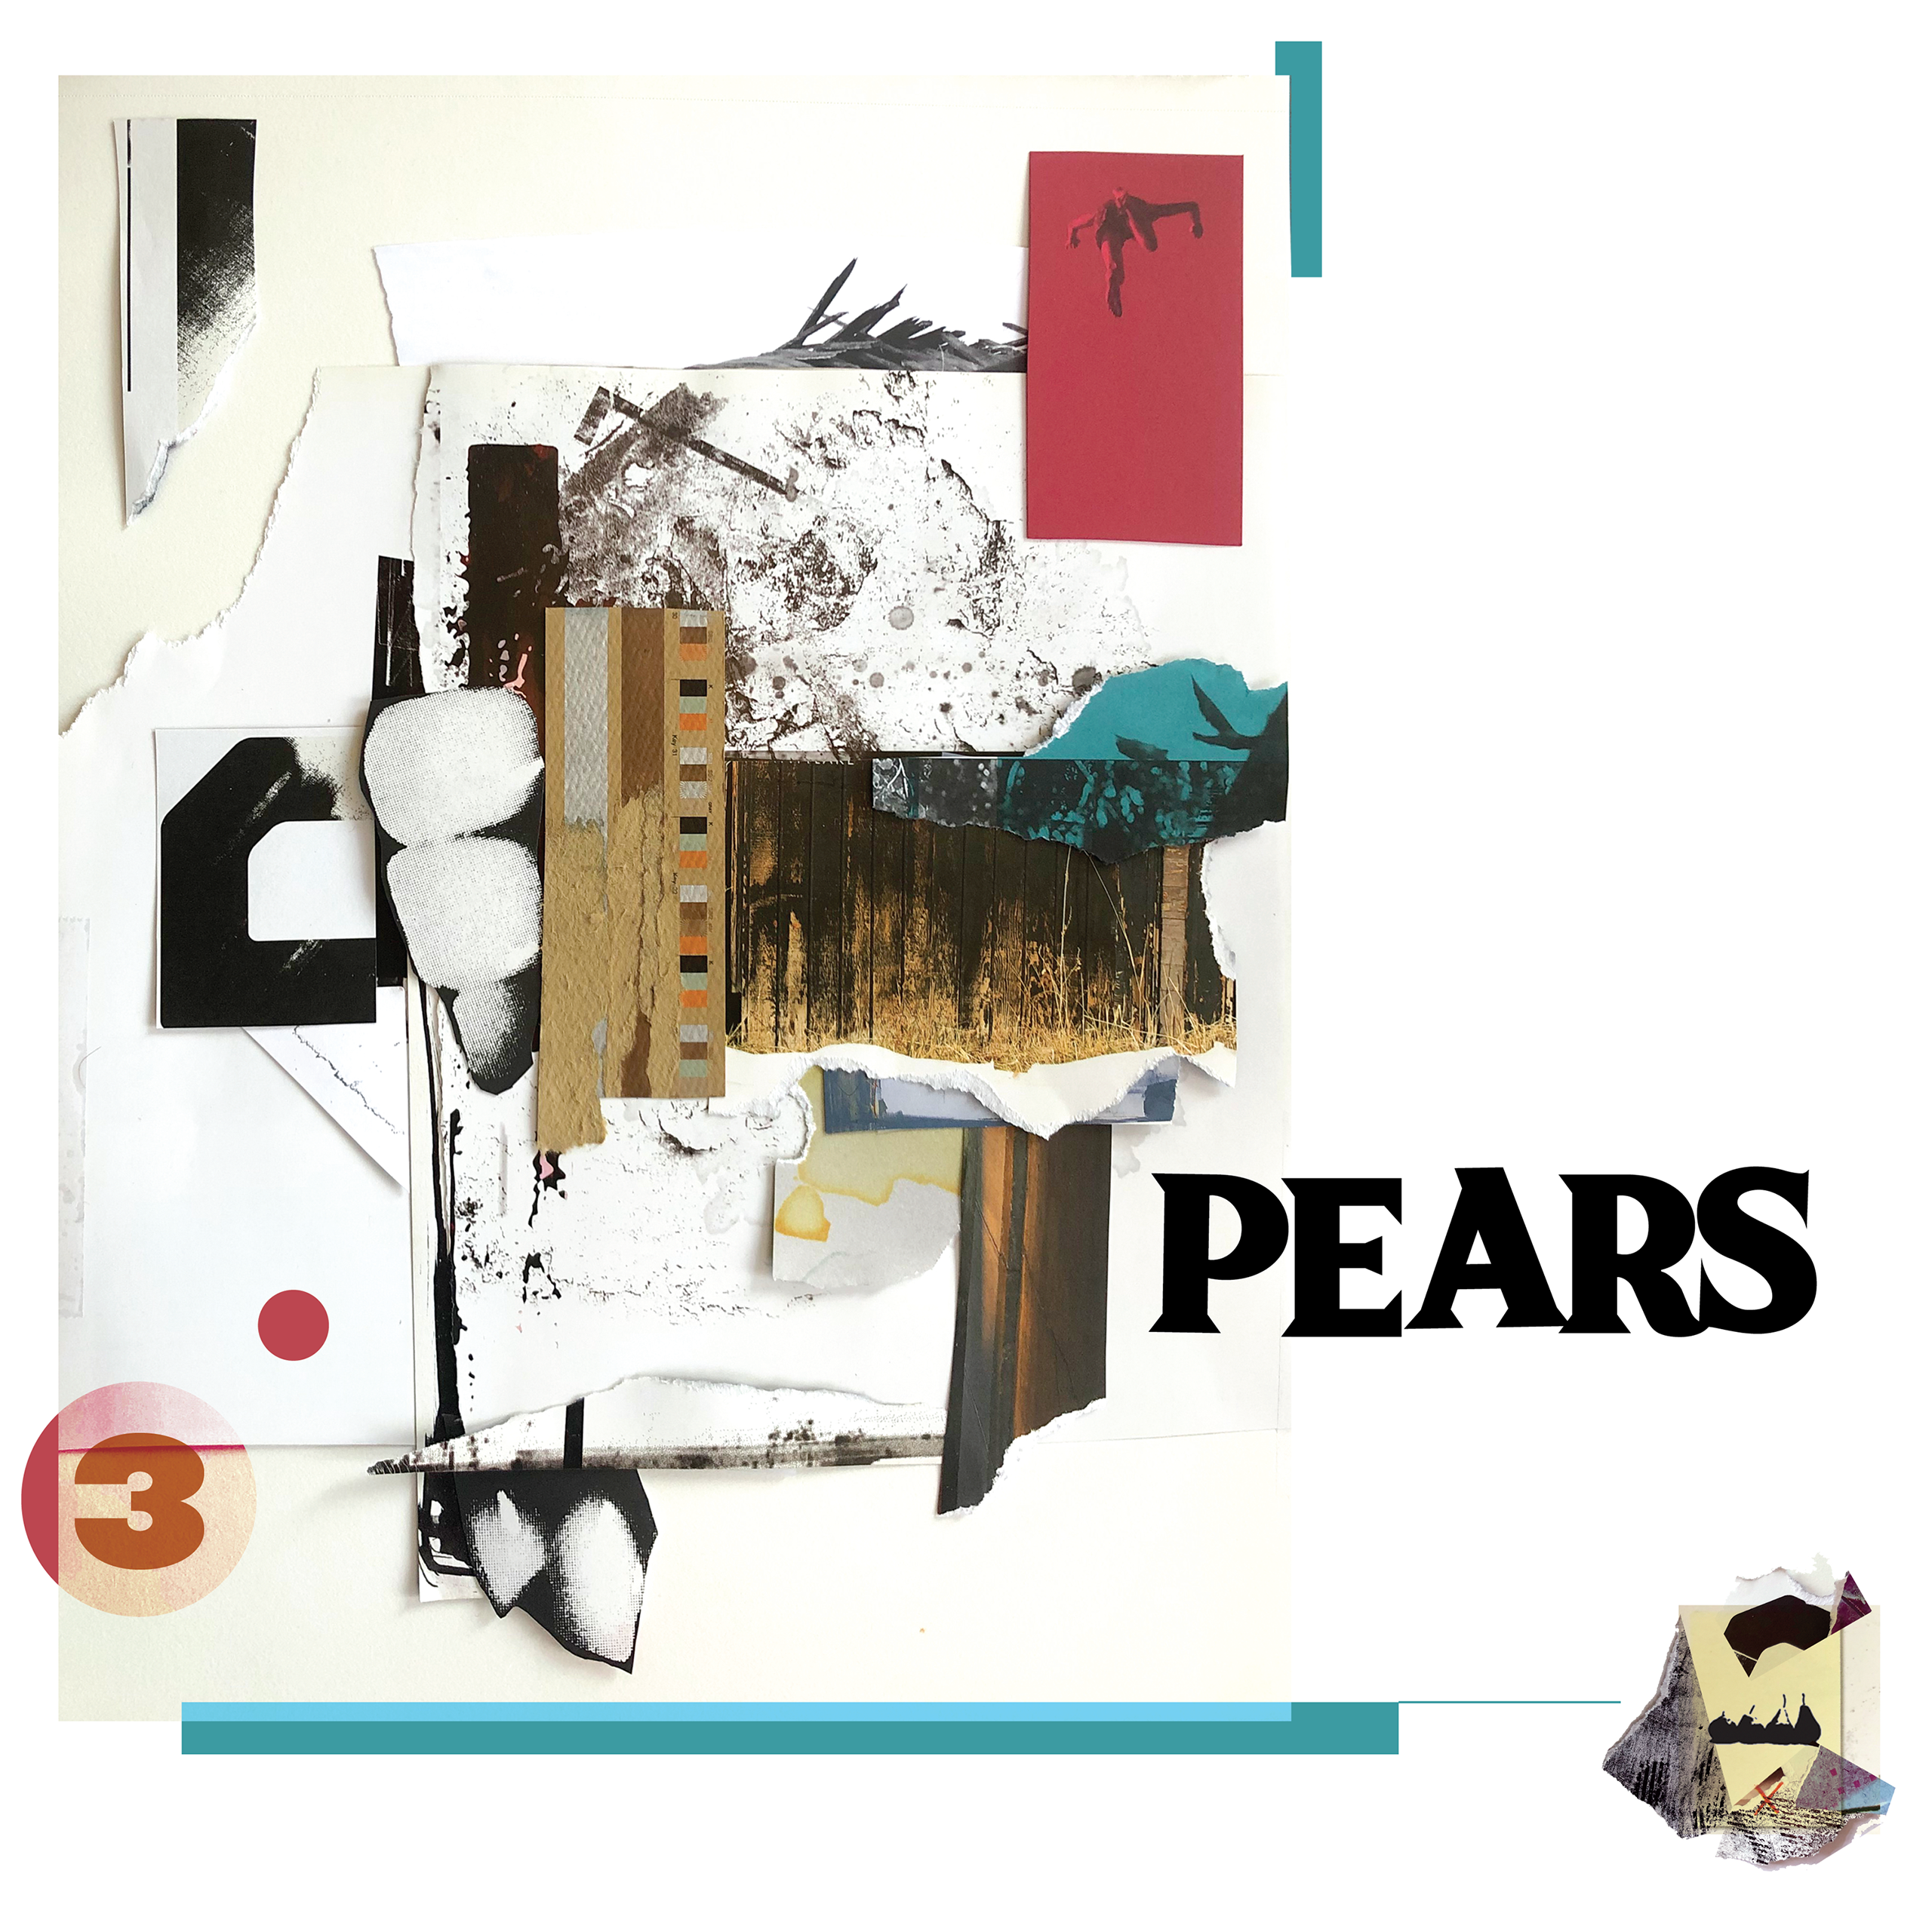 Pears "PEARS" | © 2020 | Fat Wreck Chords